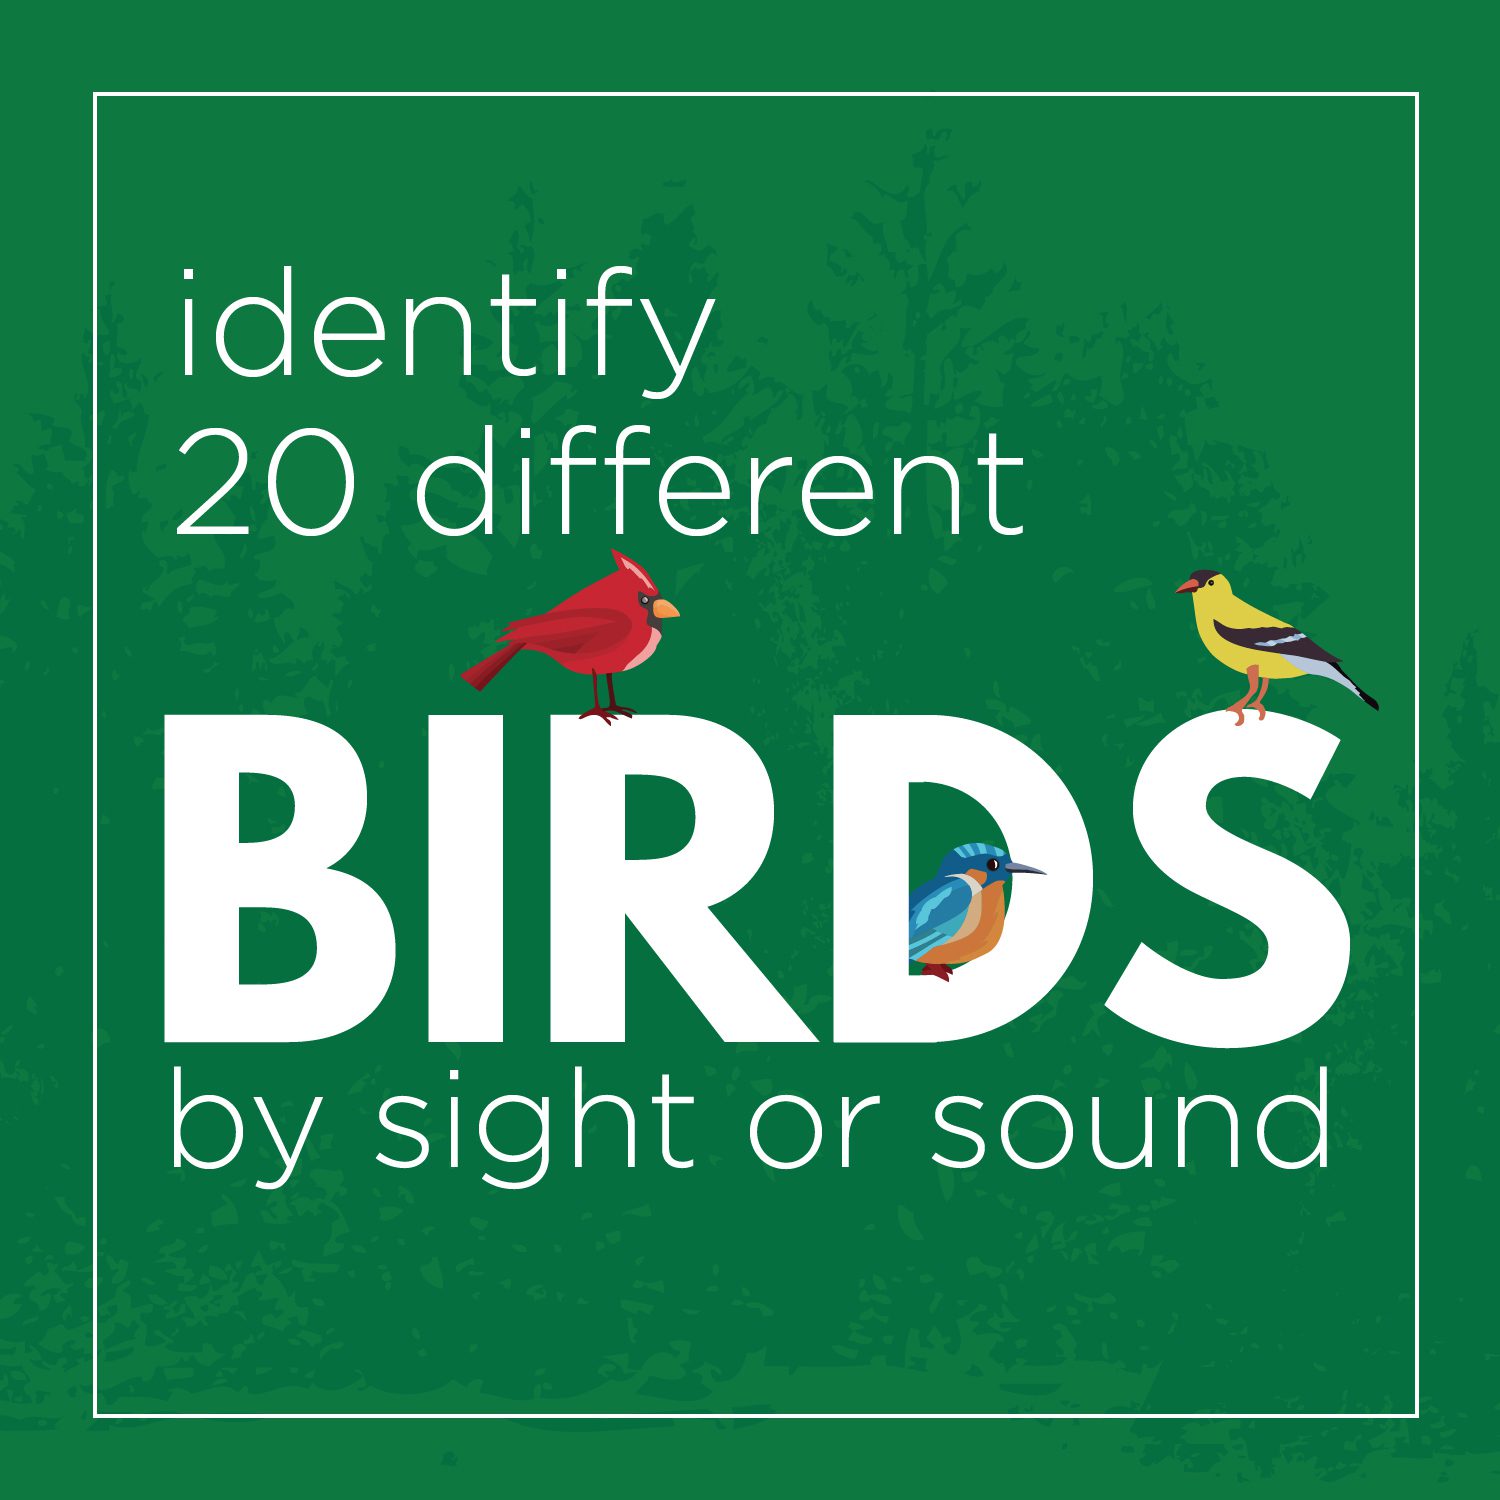 Identify 20 different birds by sight or sound